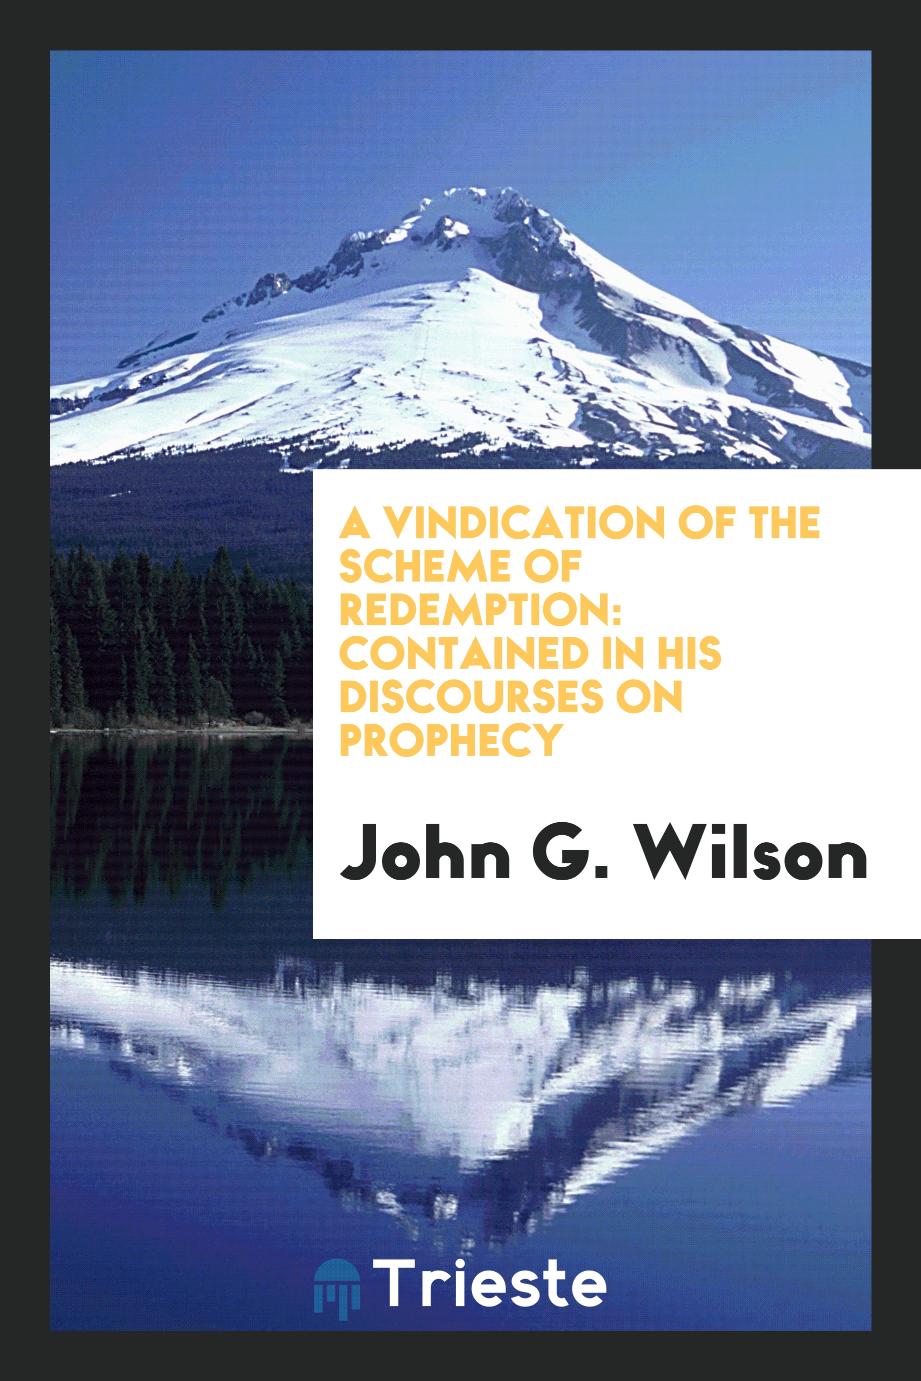 A Vindication of the Scheme of Redemption: Contained in His Discourses on Prophecy